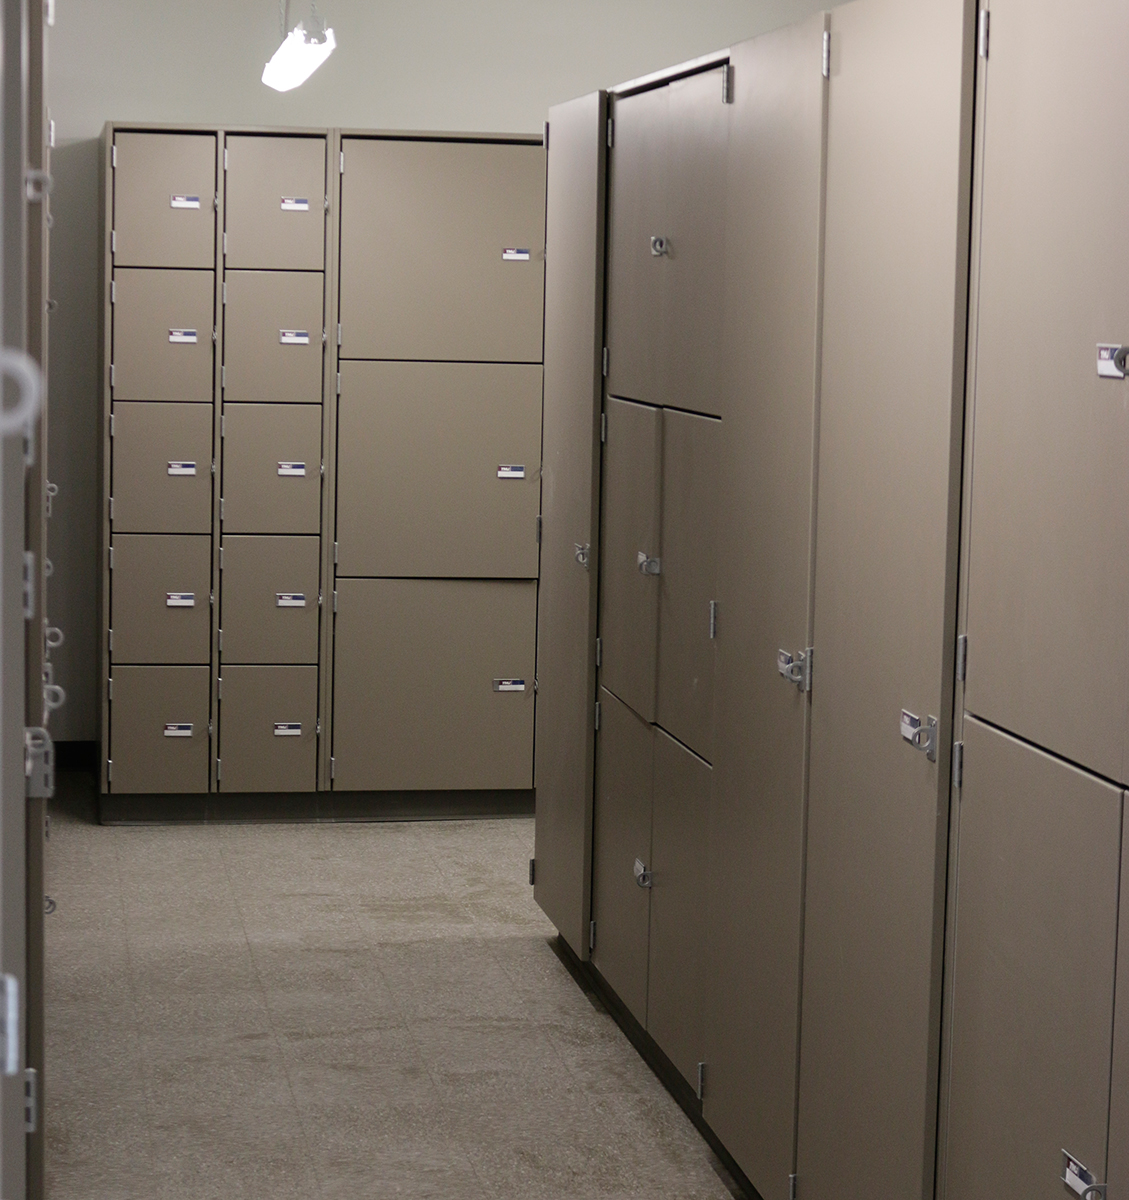 Storage lockers for instruments of all sizes